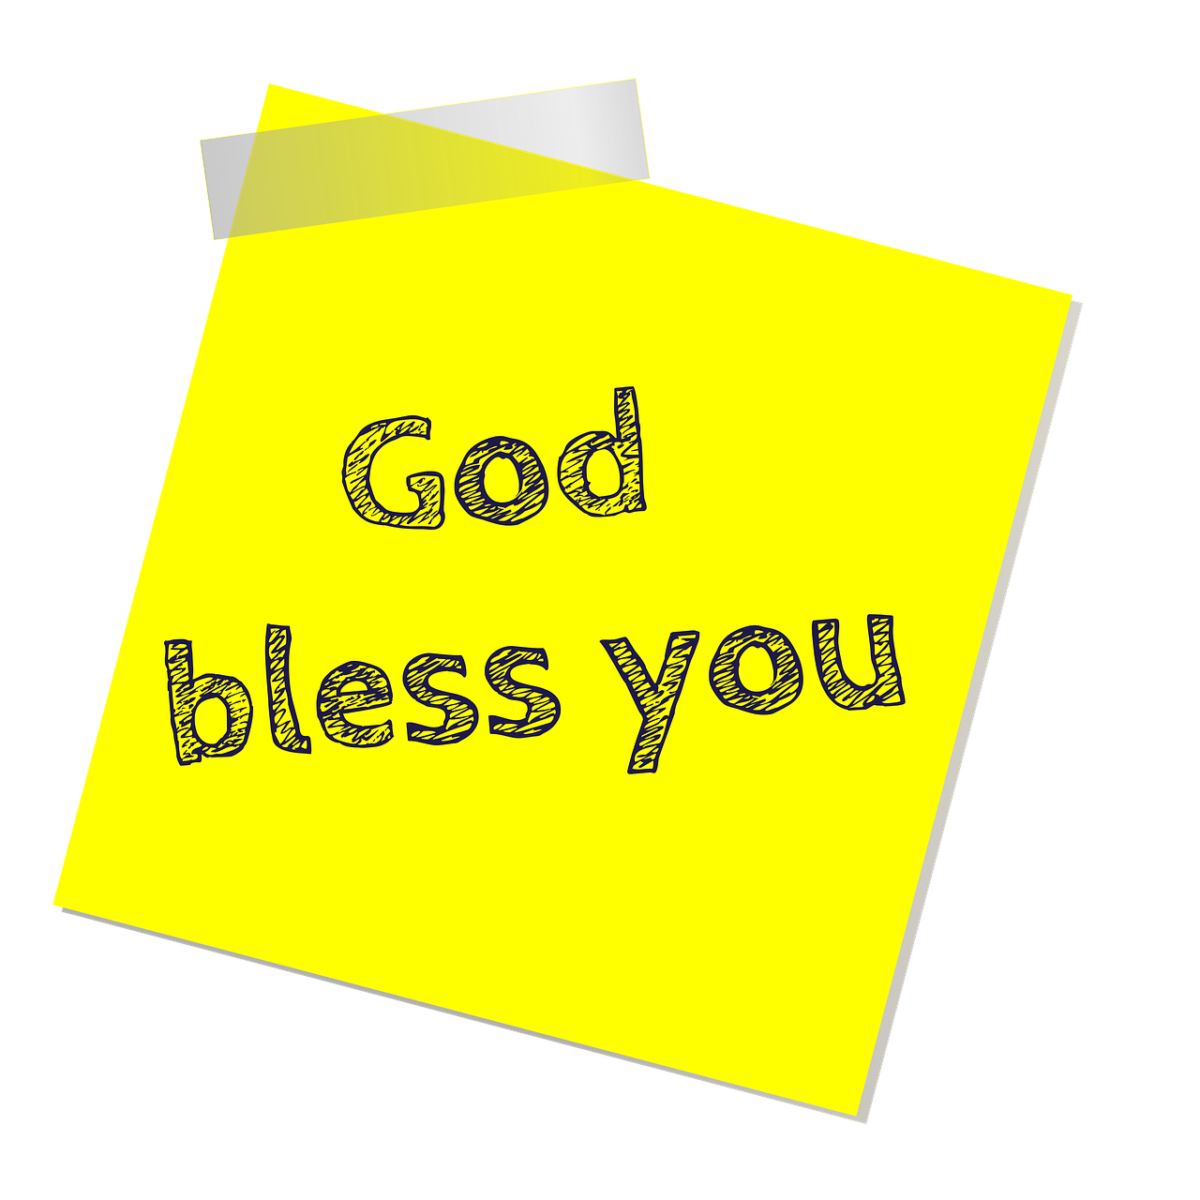 yellow sticky note with "God Bless You" written on it